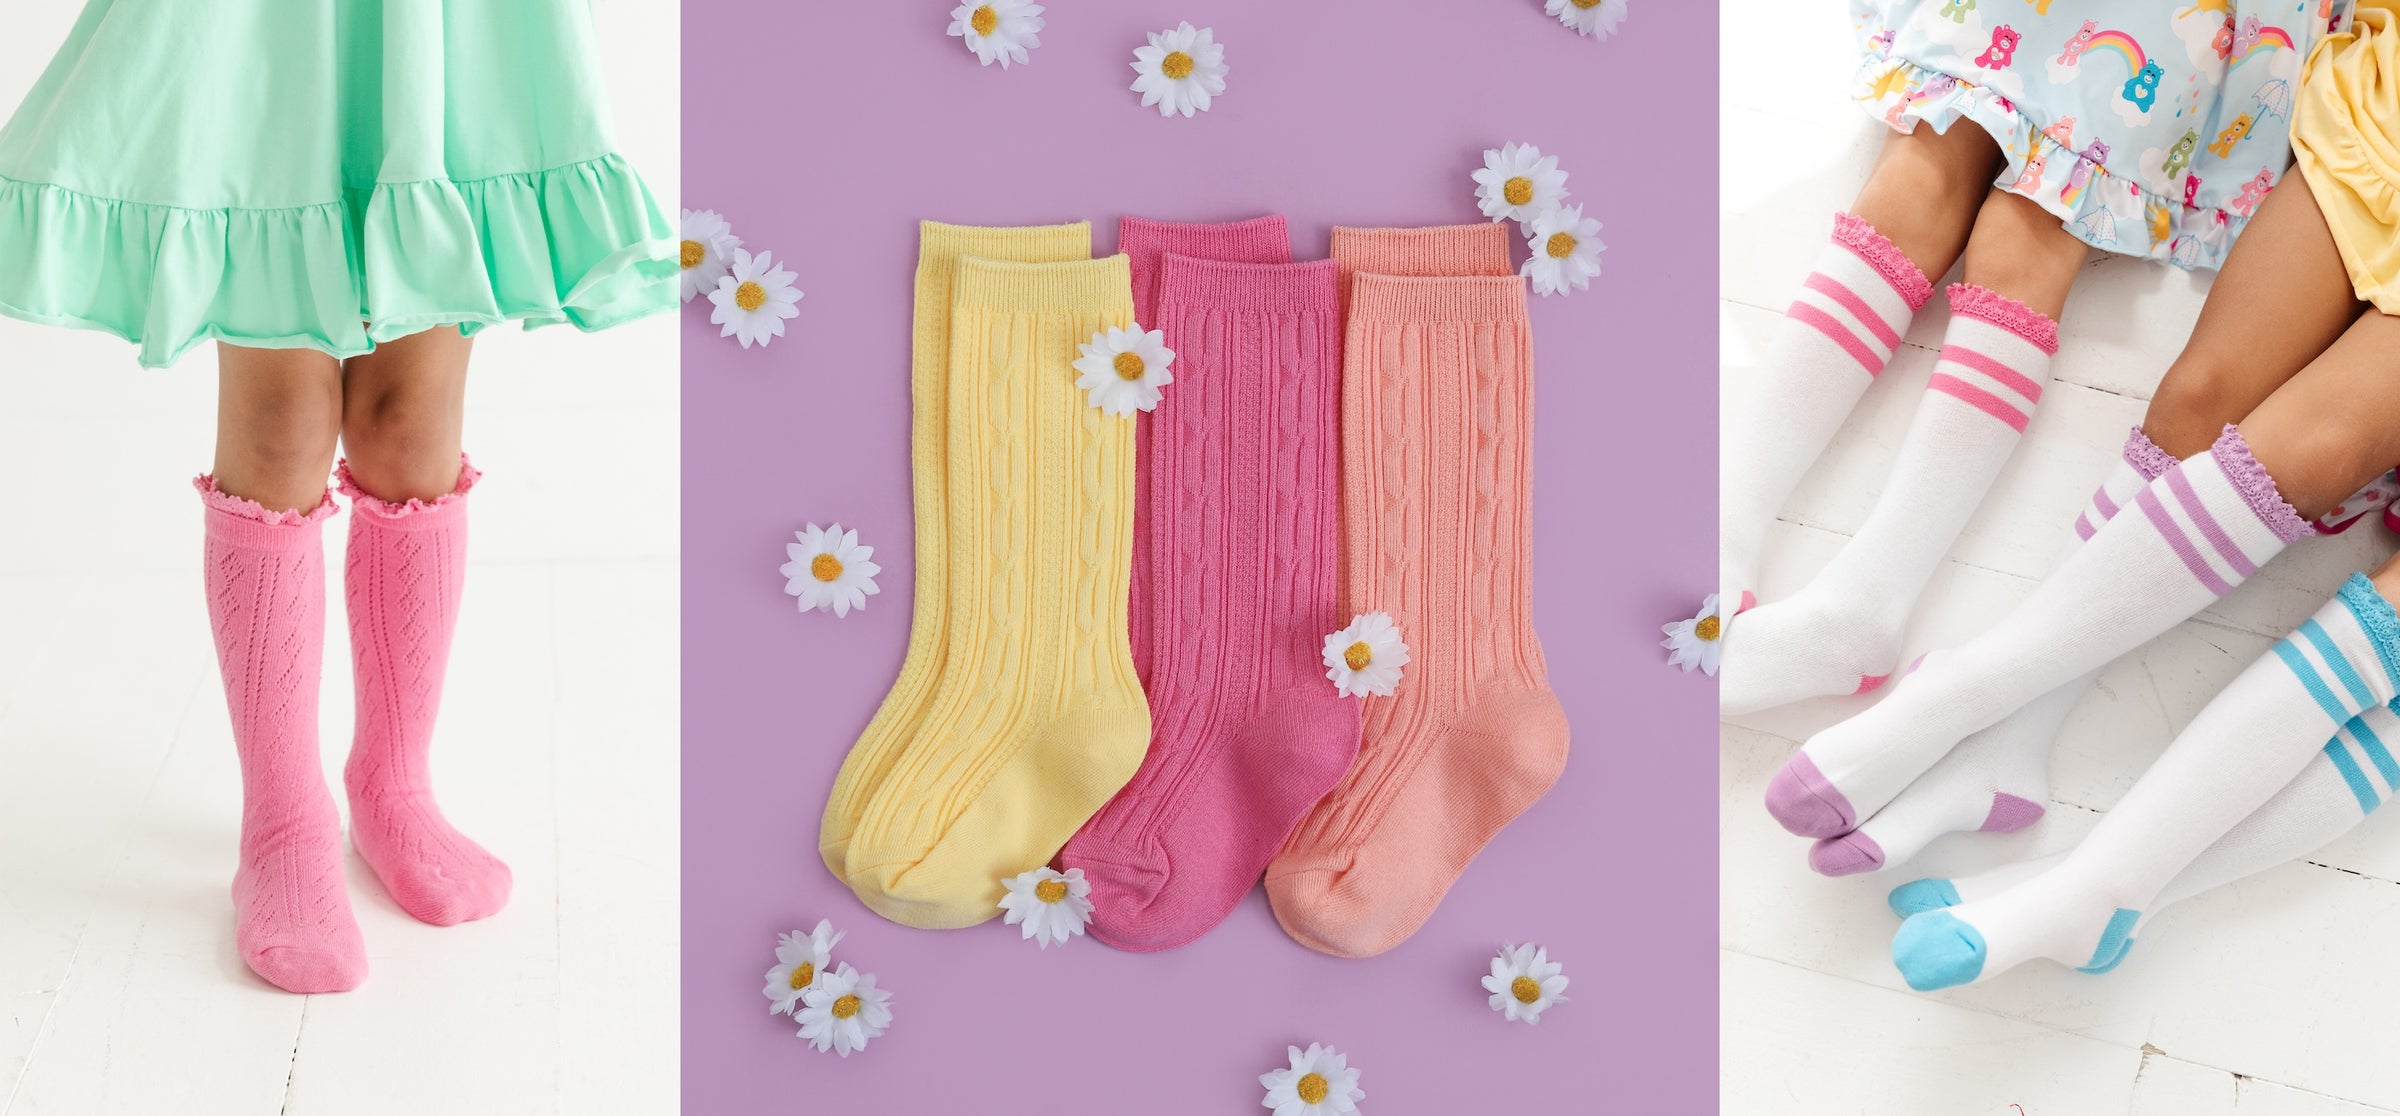 The Cutest Socks for Girls! Knee Highs, Lace Trim, Fun Patterns